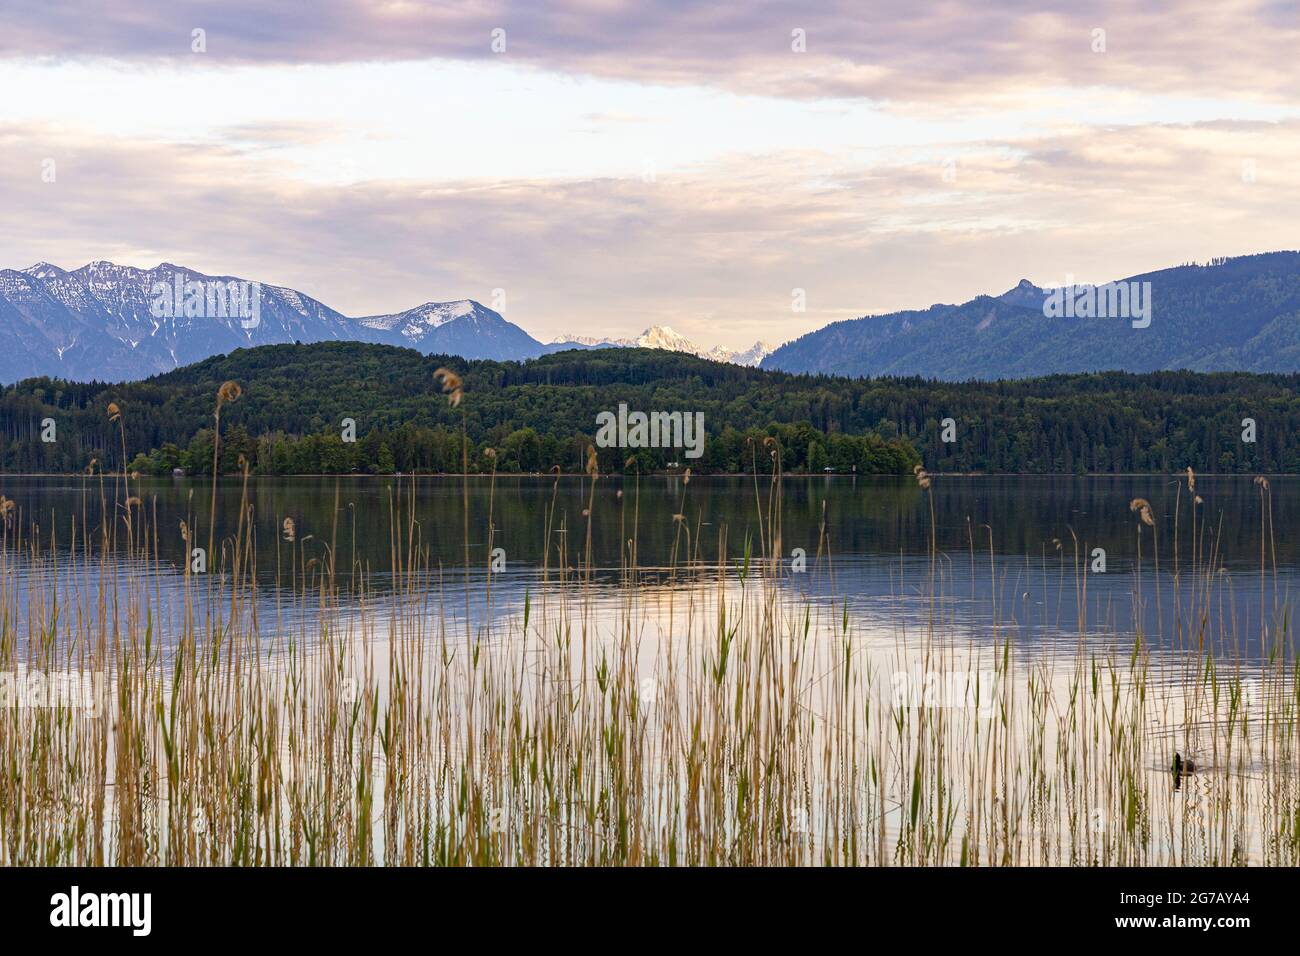 View over the water to the mountains in the evening light in the moor areas at the Staffelsee, Murnau, Upper Bavaria, Germany Stock Photo